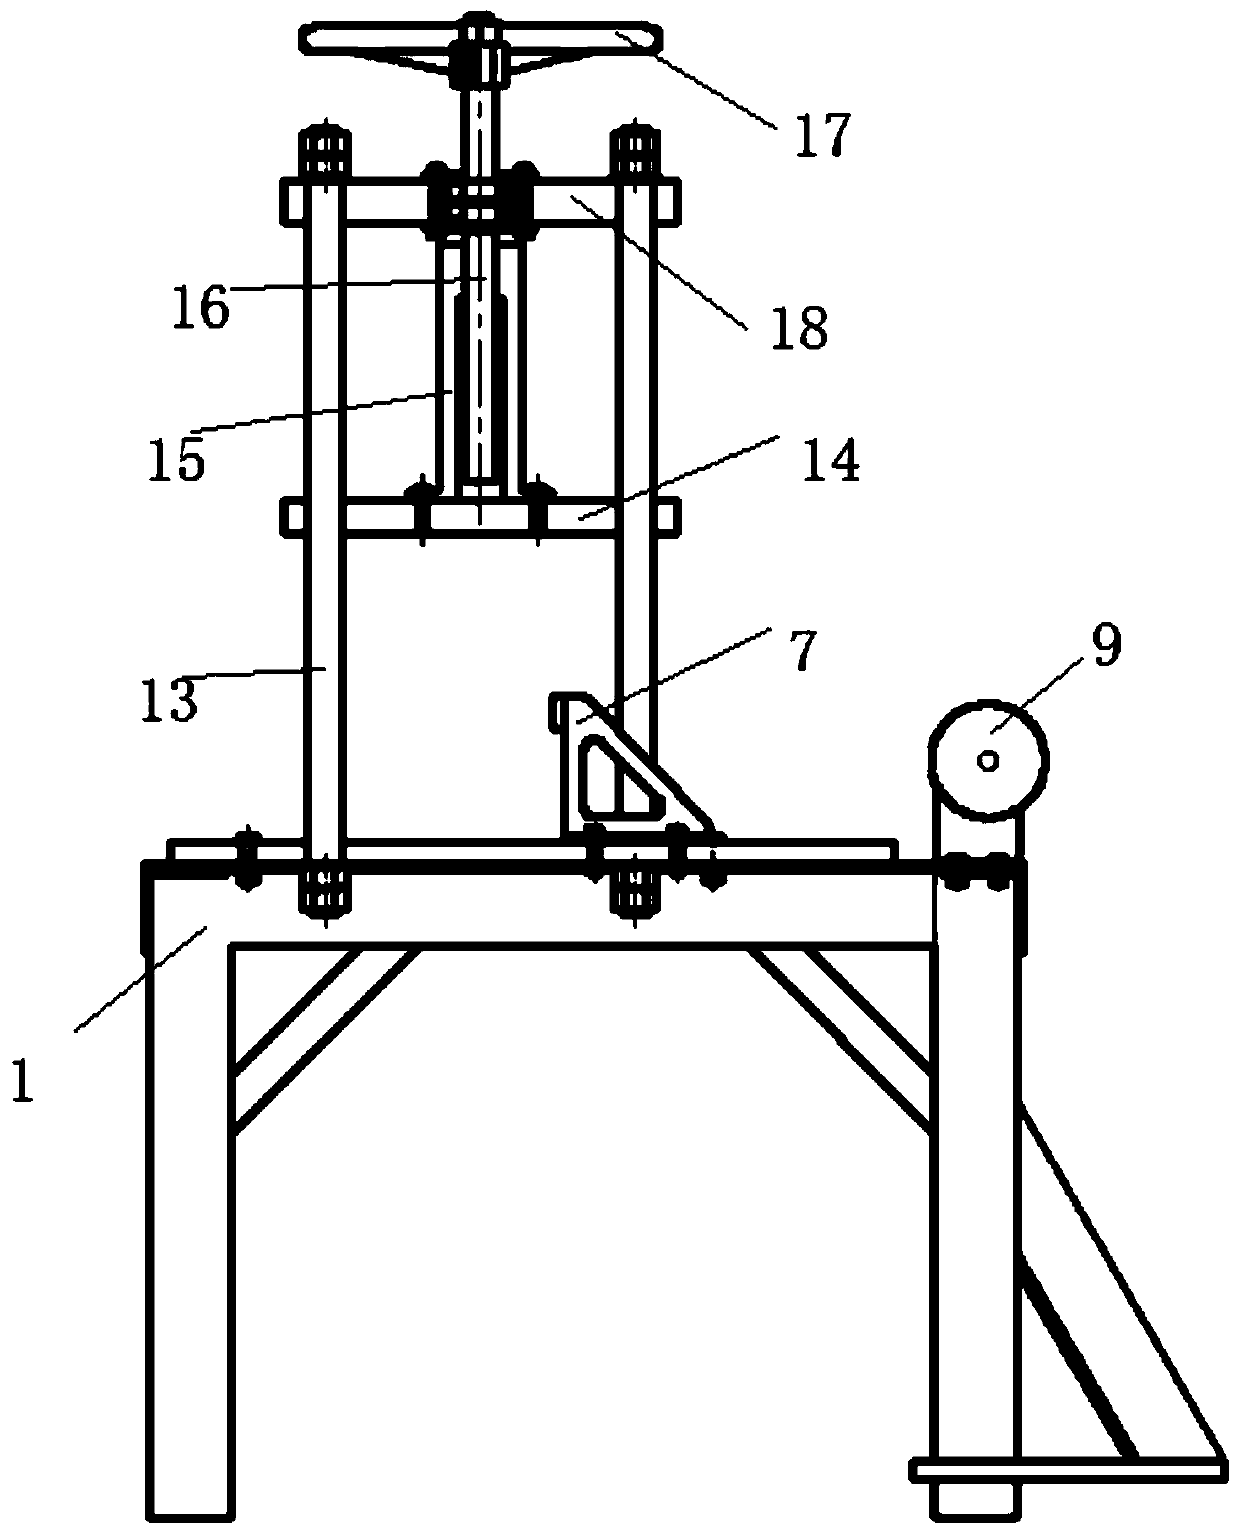 A heavy-duty multi-condition friction testing machine